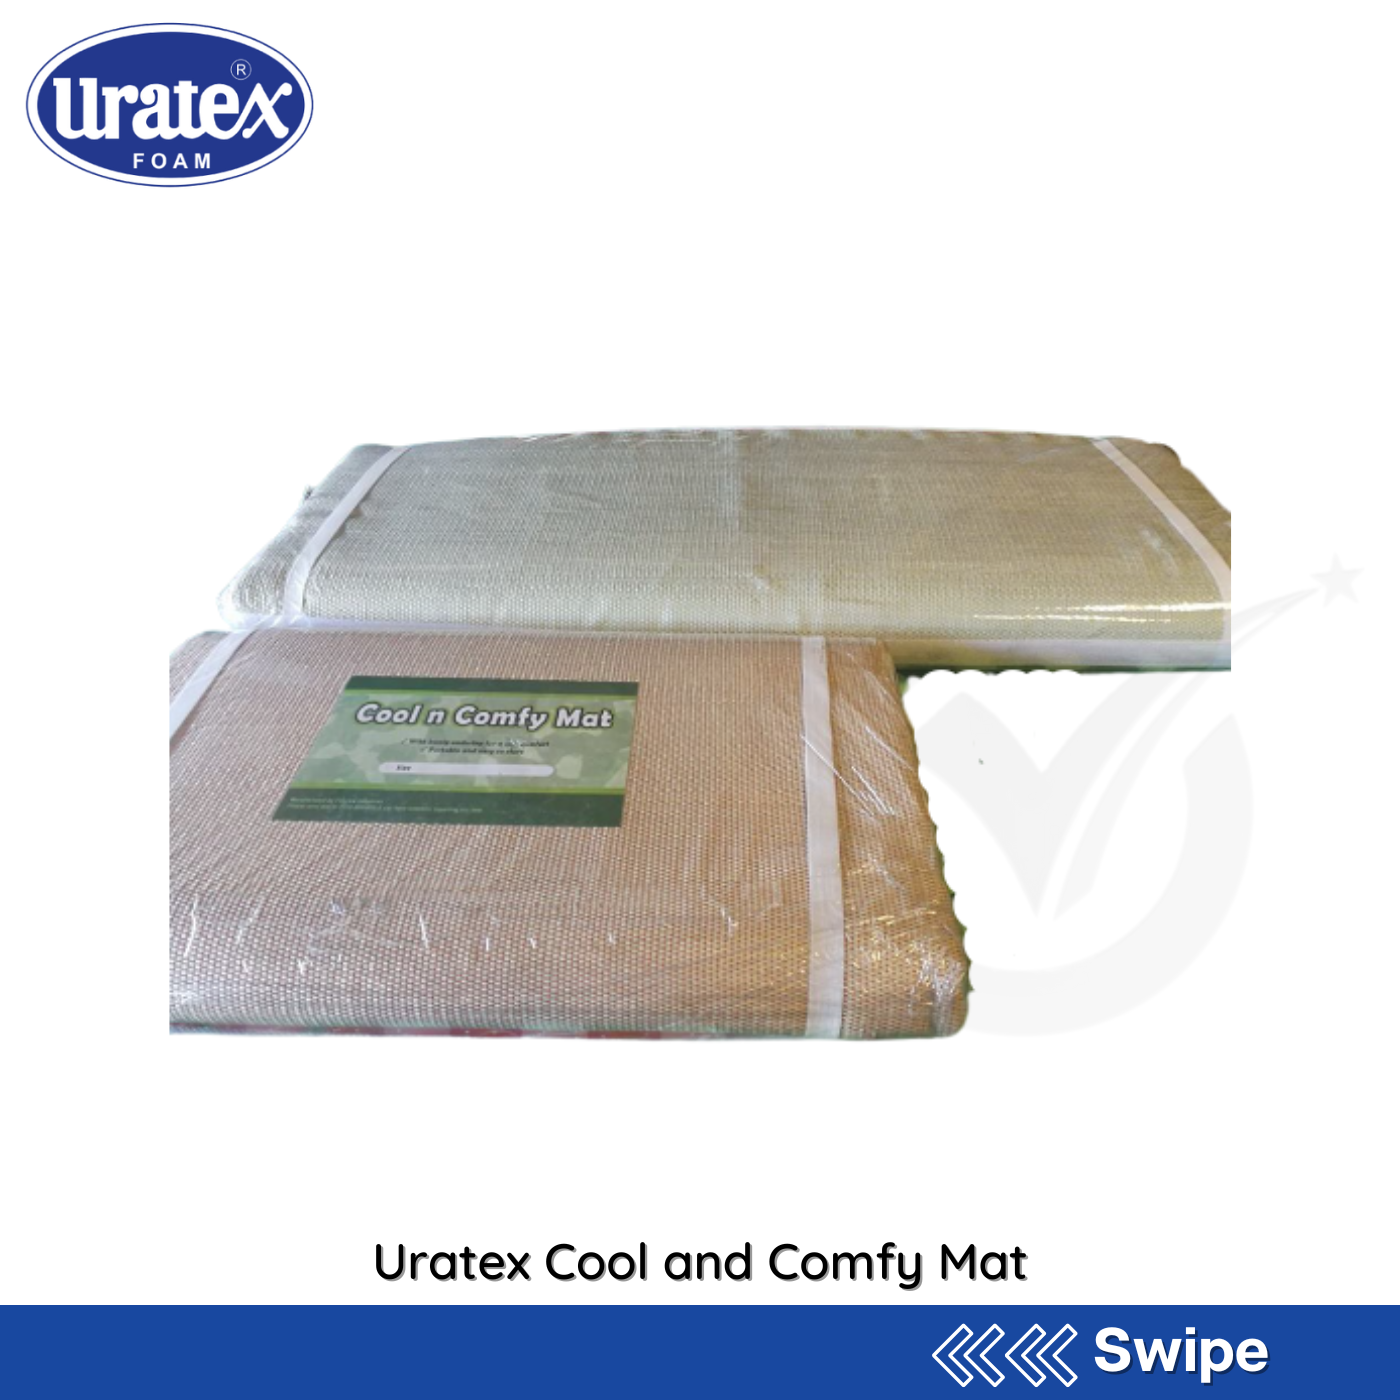 Uratex Cool and Comfy Mat - People's Choice Marketing